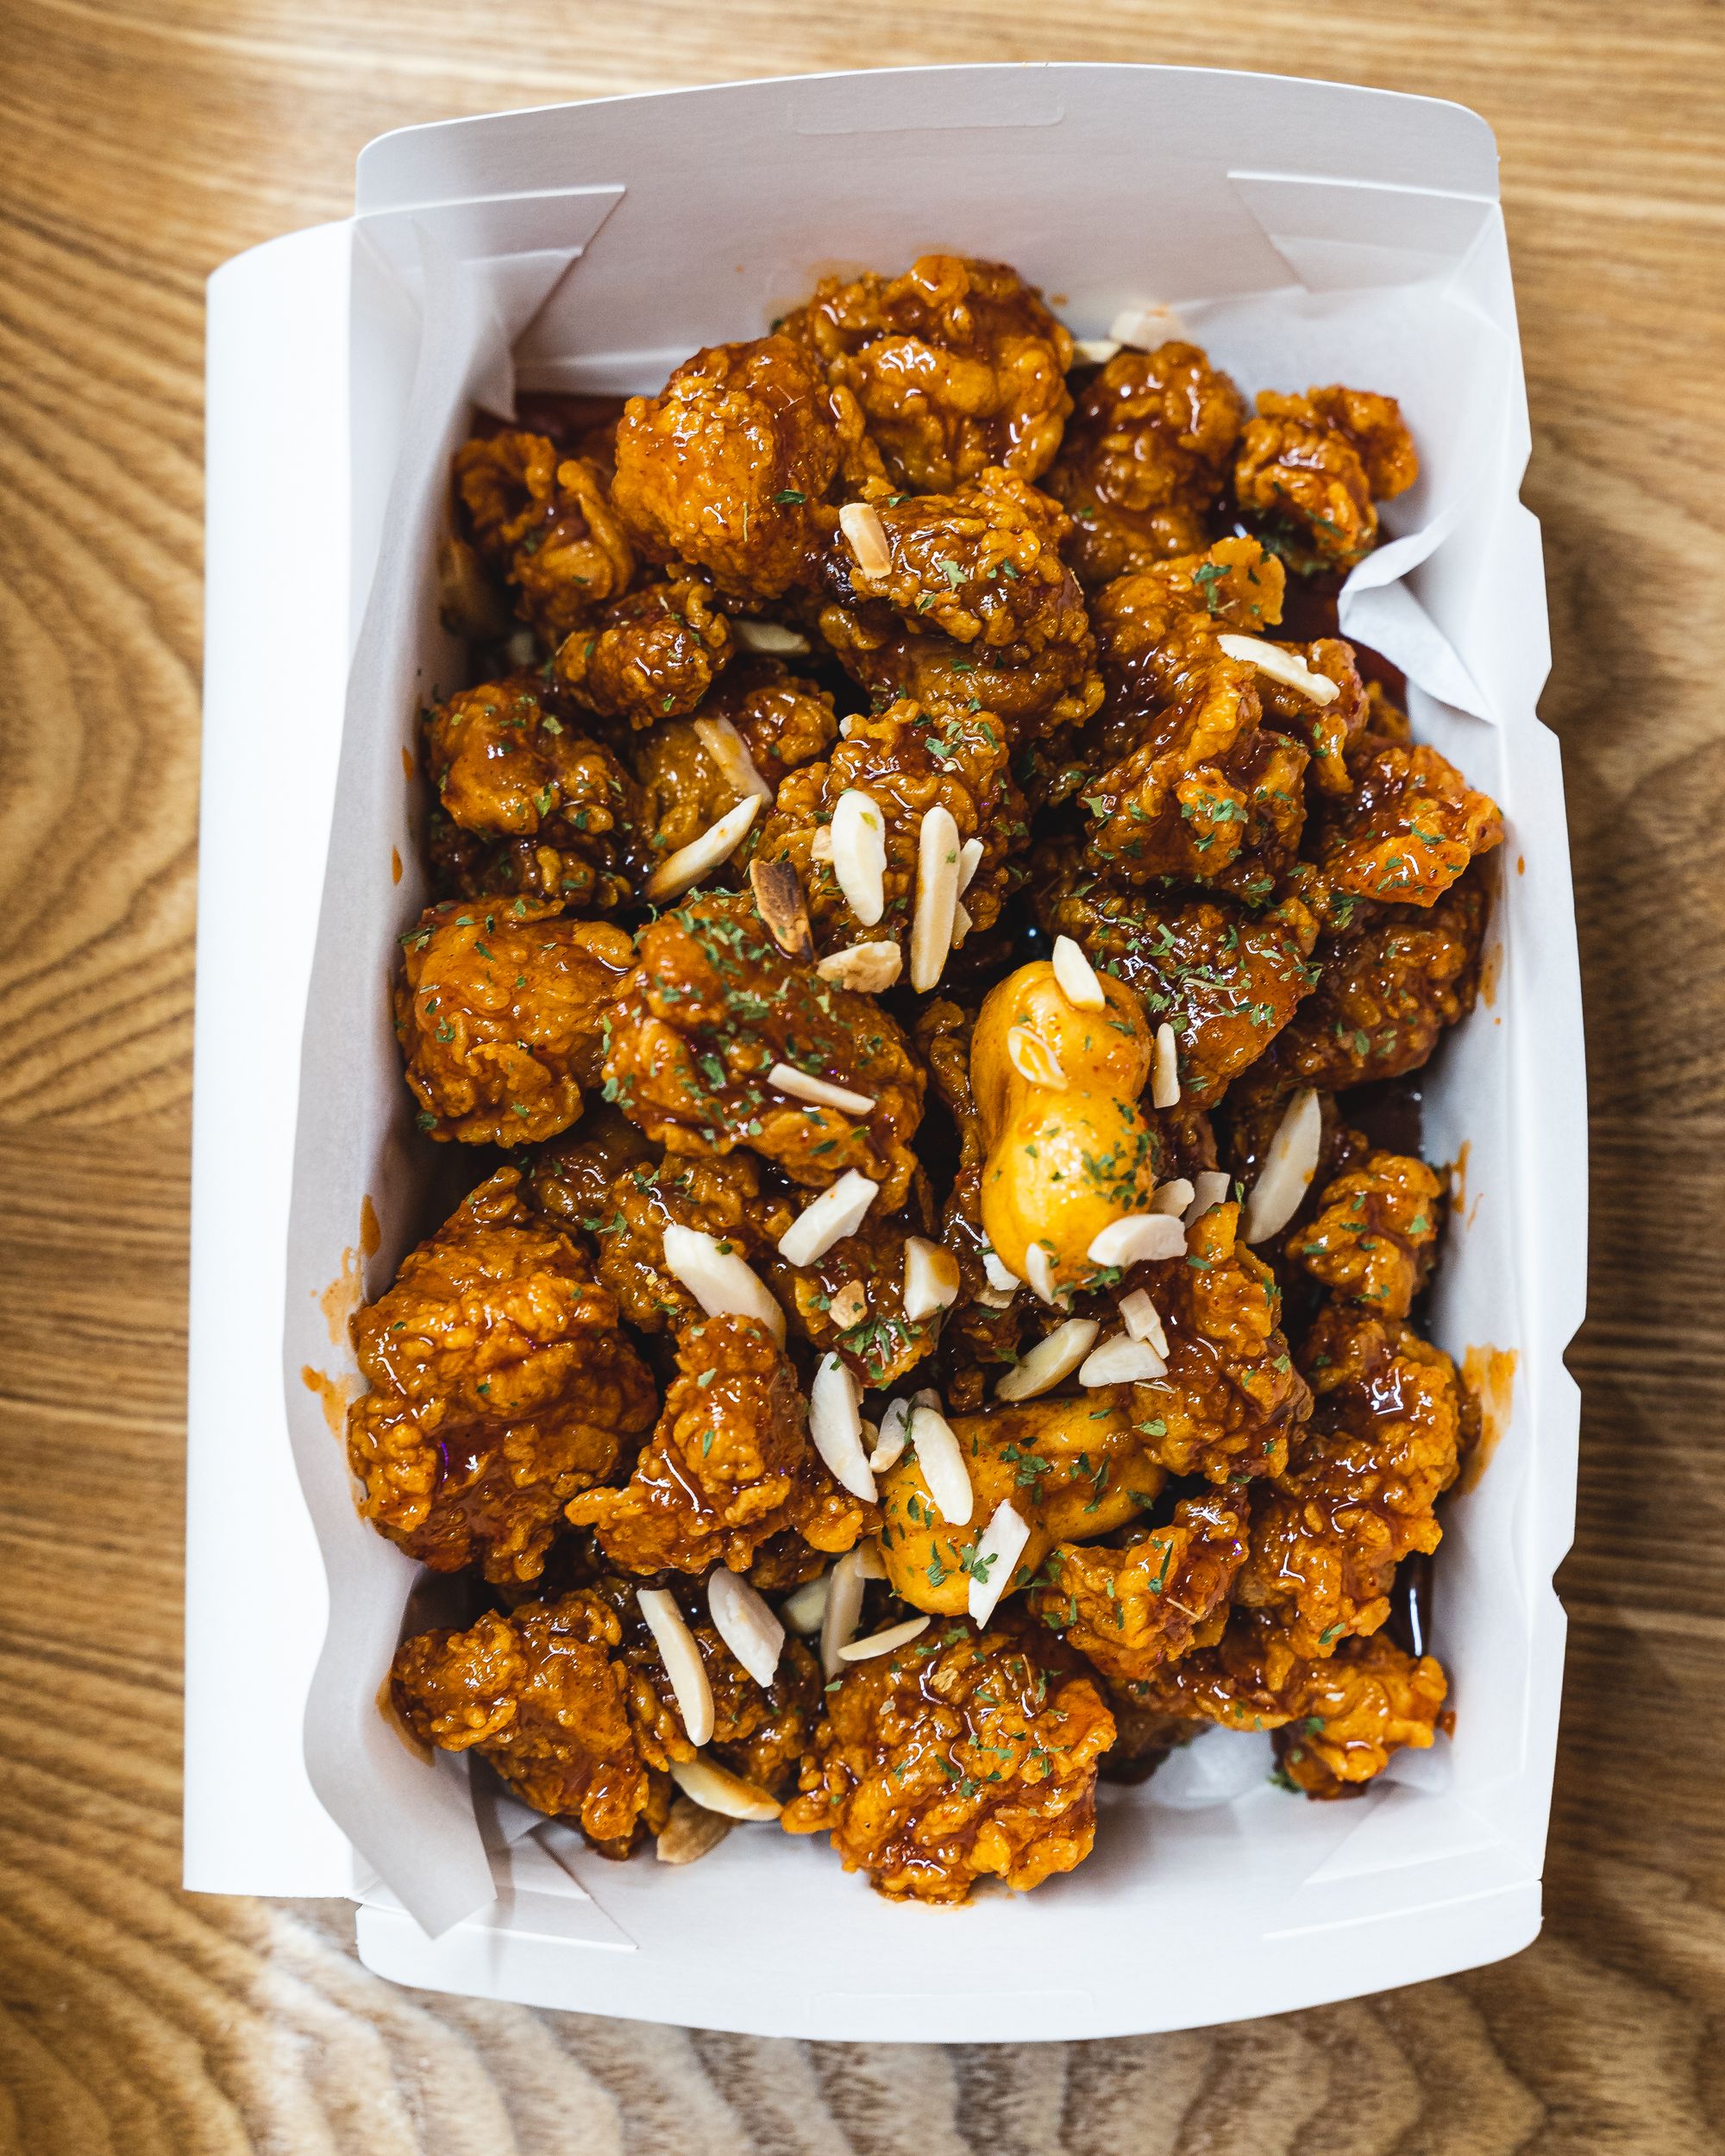 Overhead shot of Korean fried chicken in a paper box